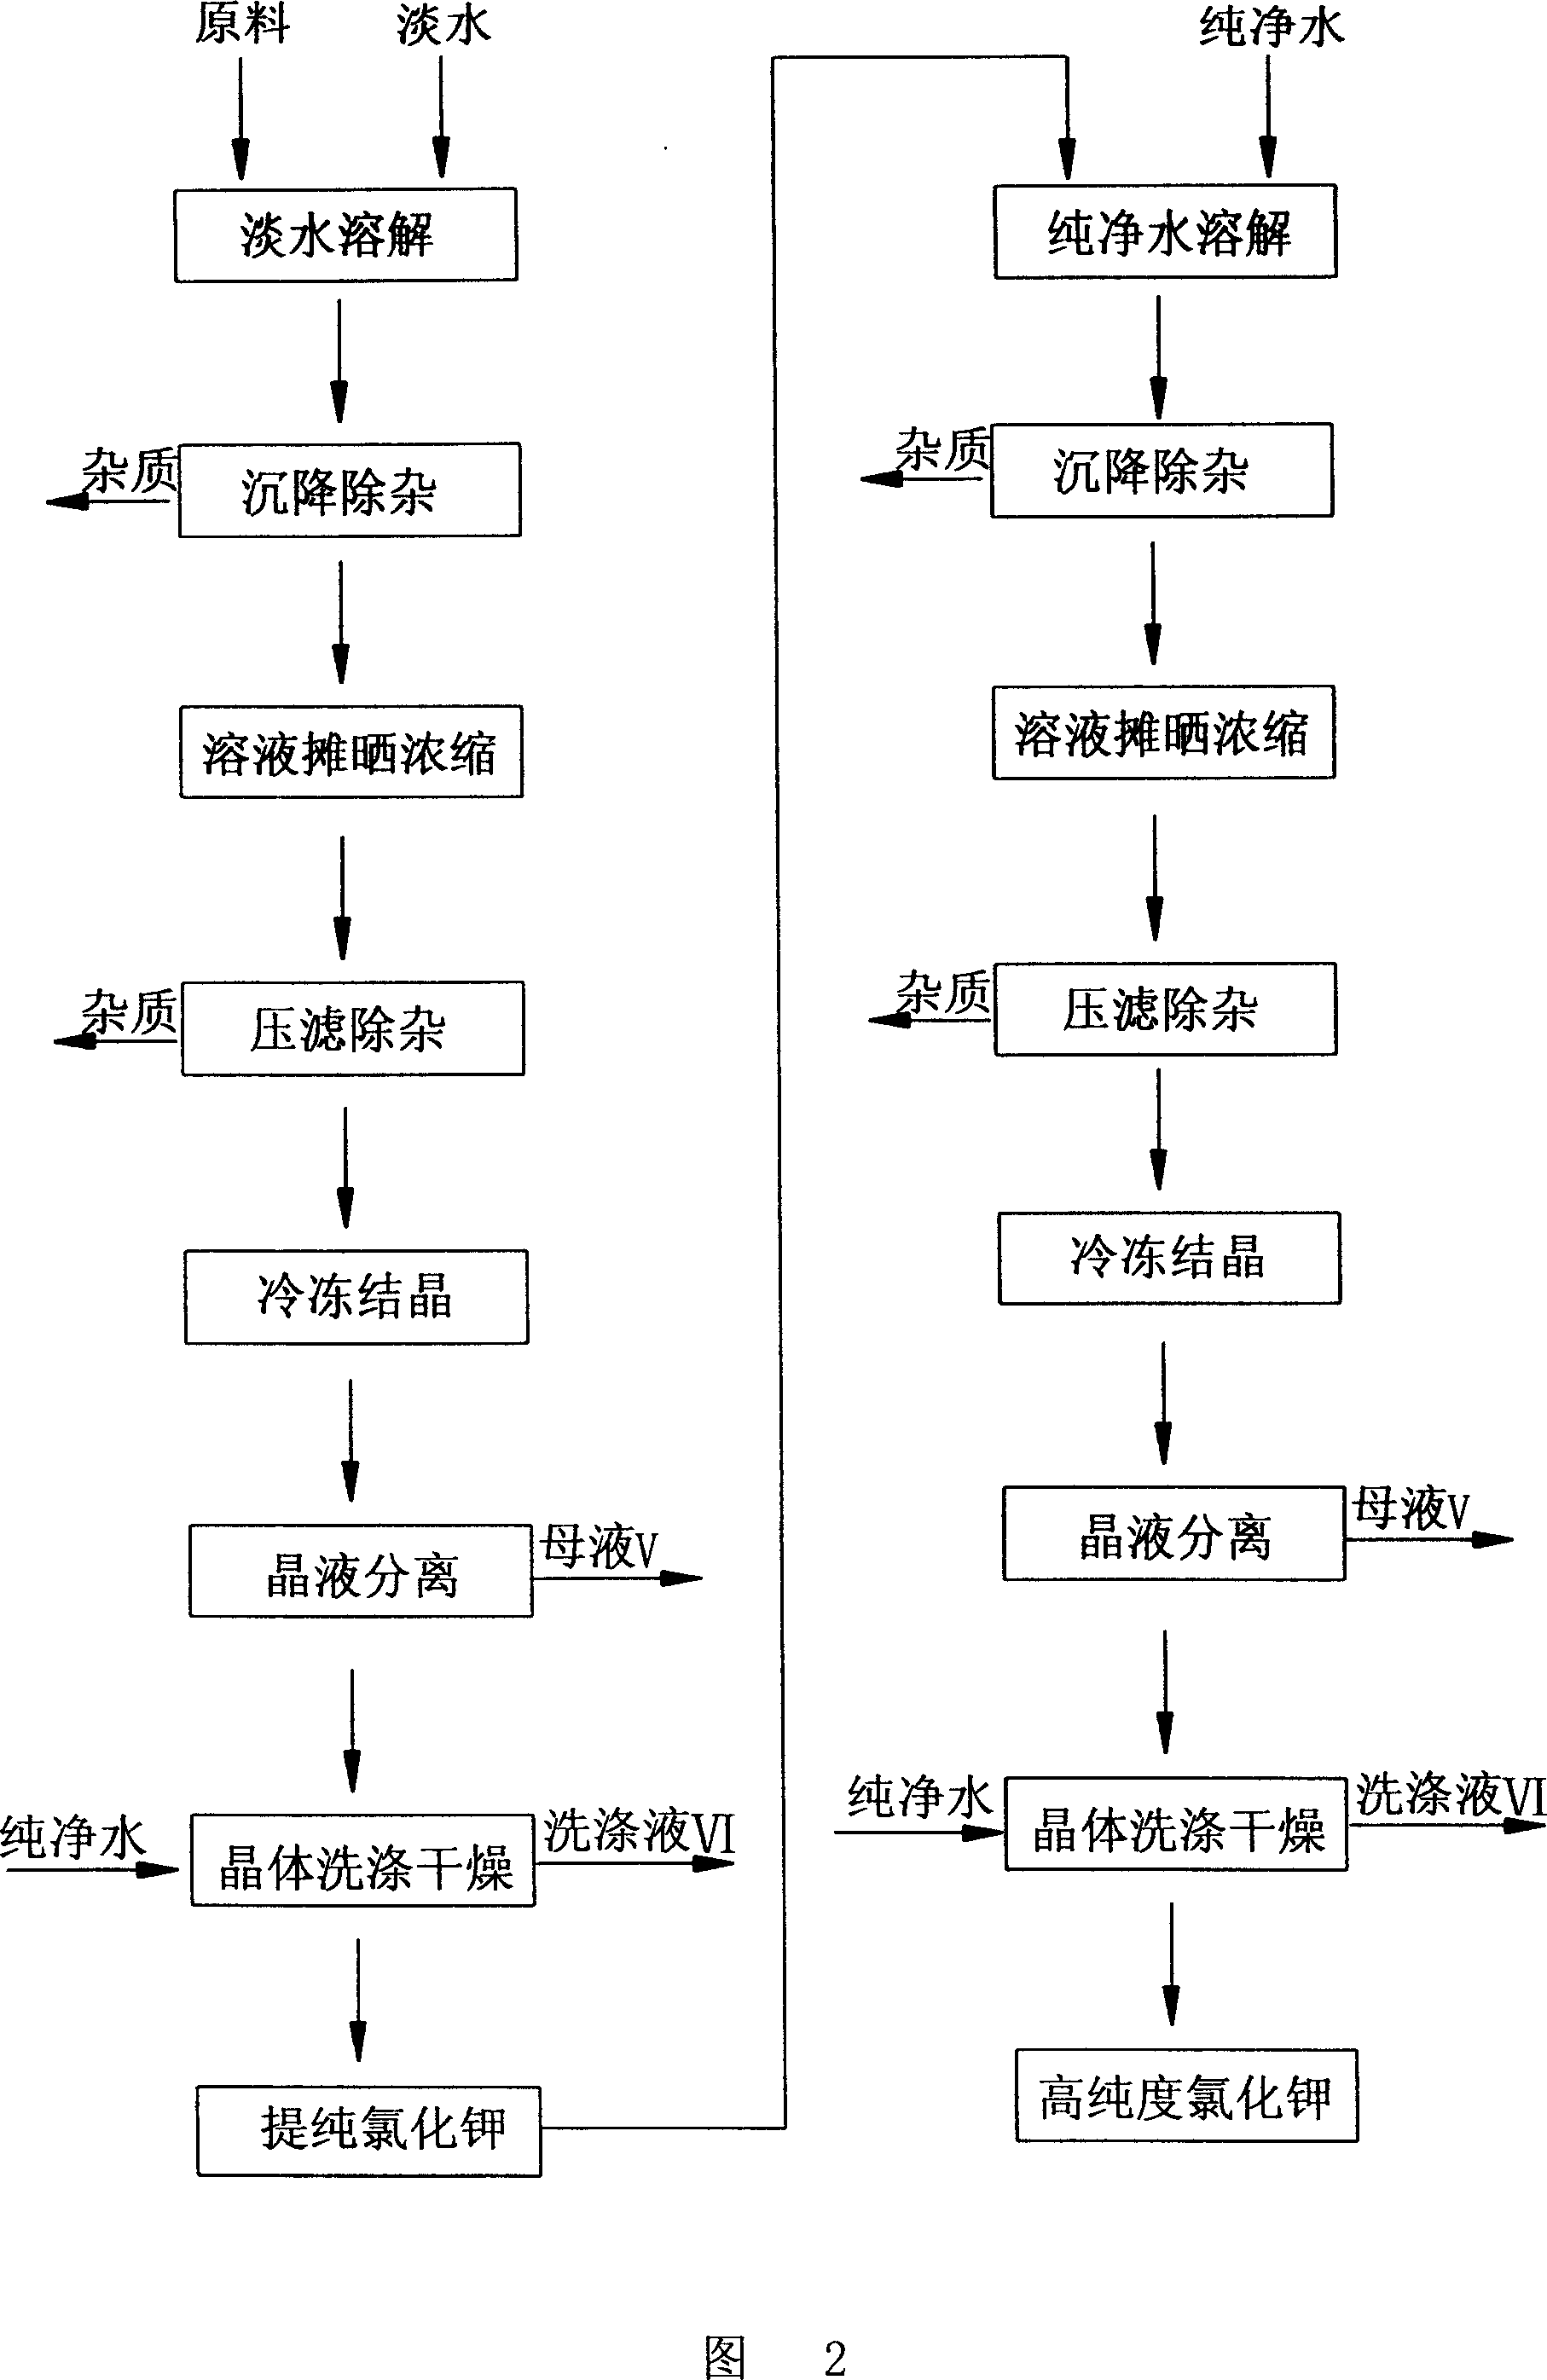 Process for producing high-purity potassium chloride